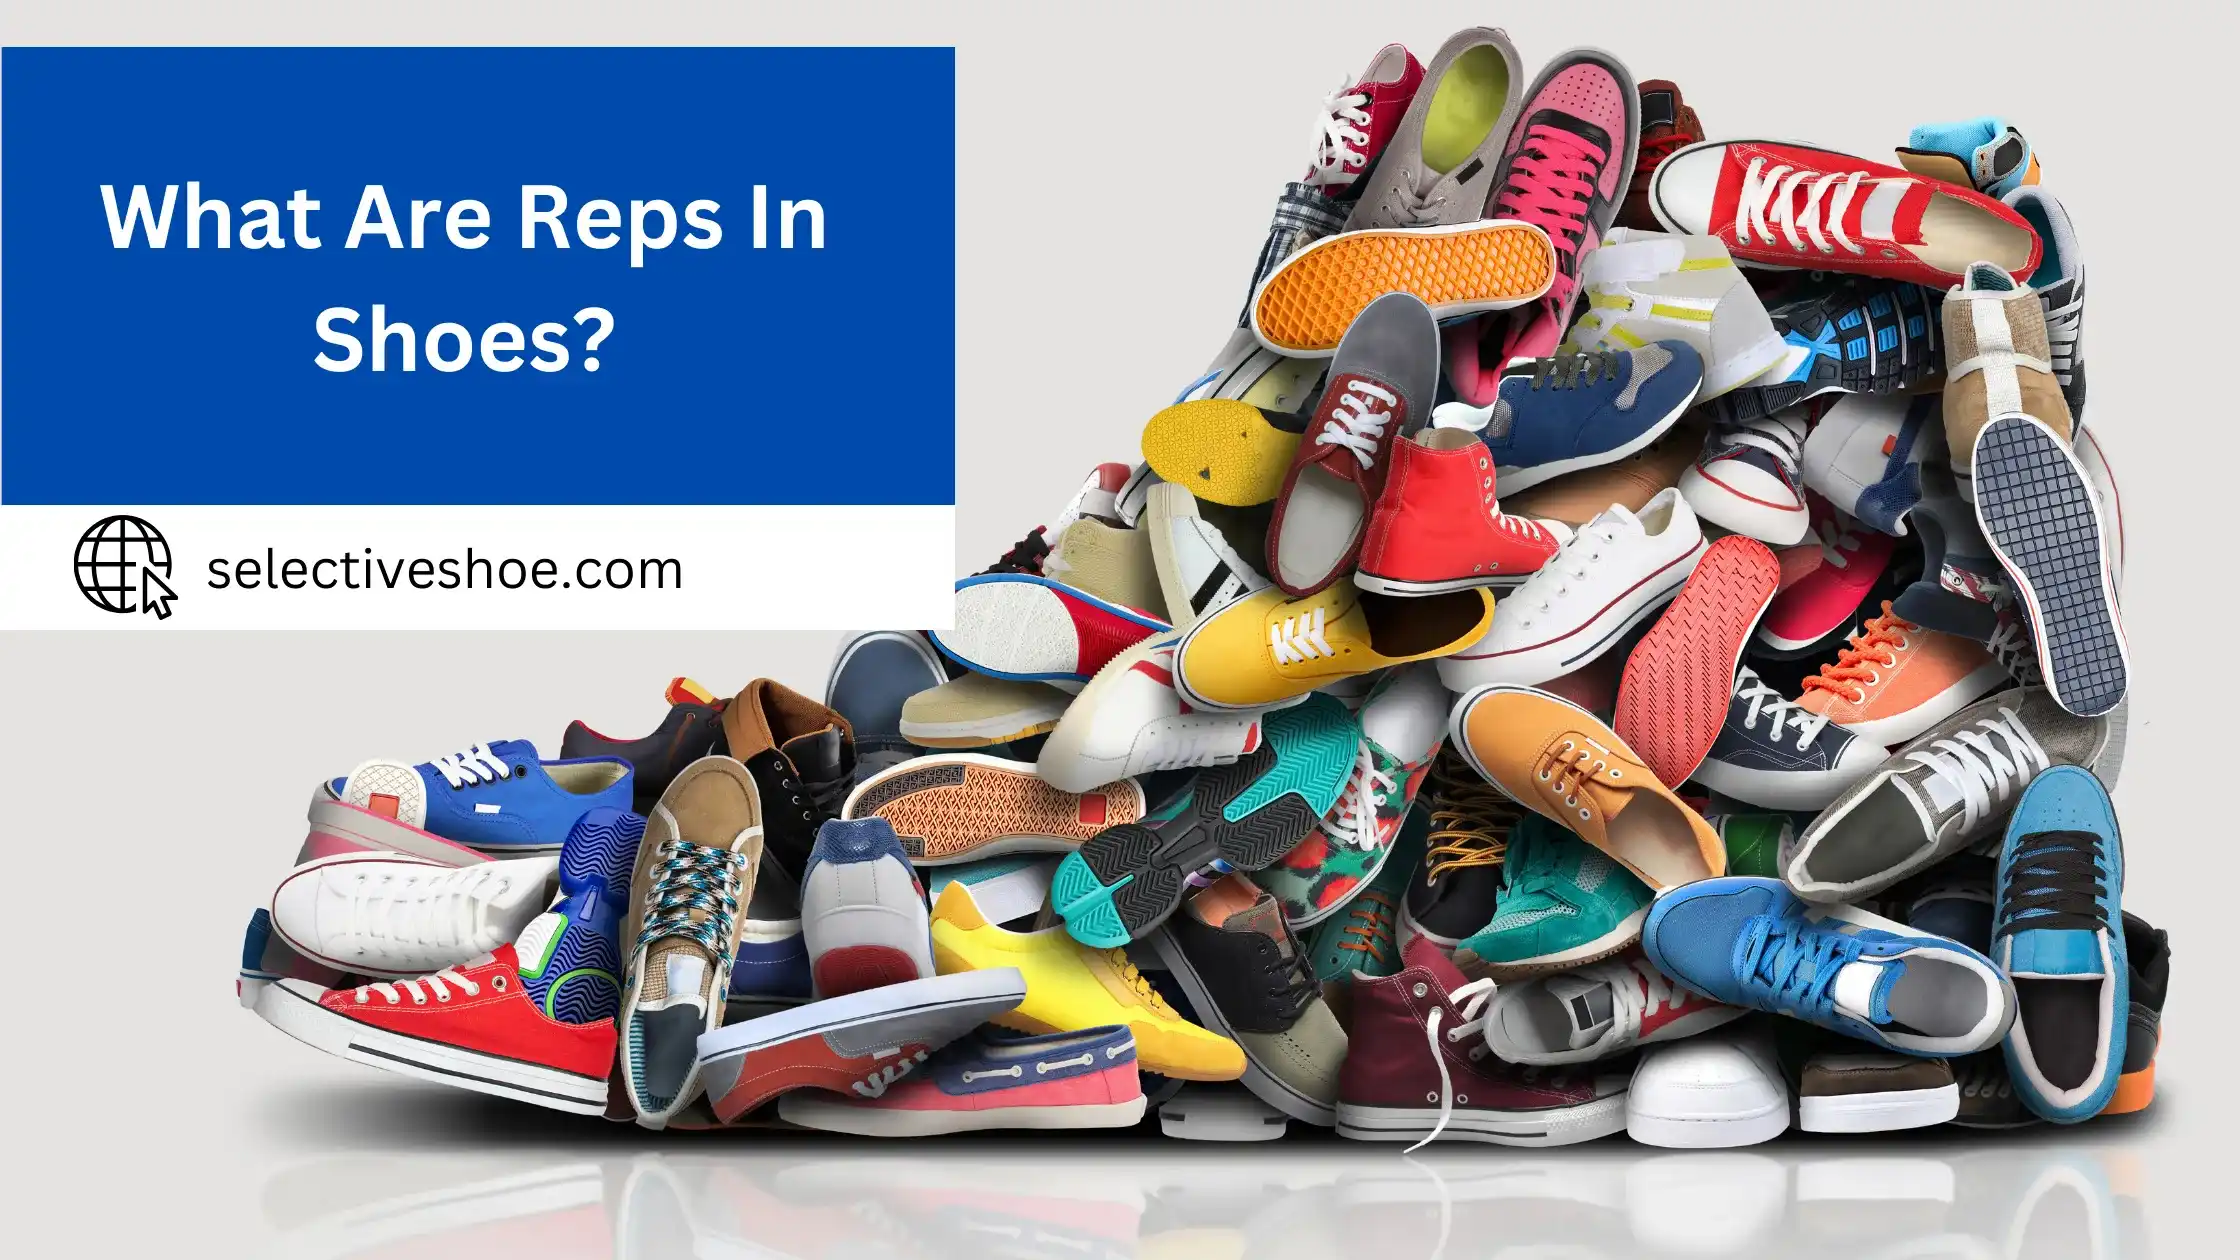 What Are Reps In Shoes? Detailed Information